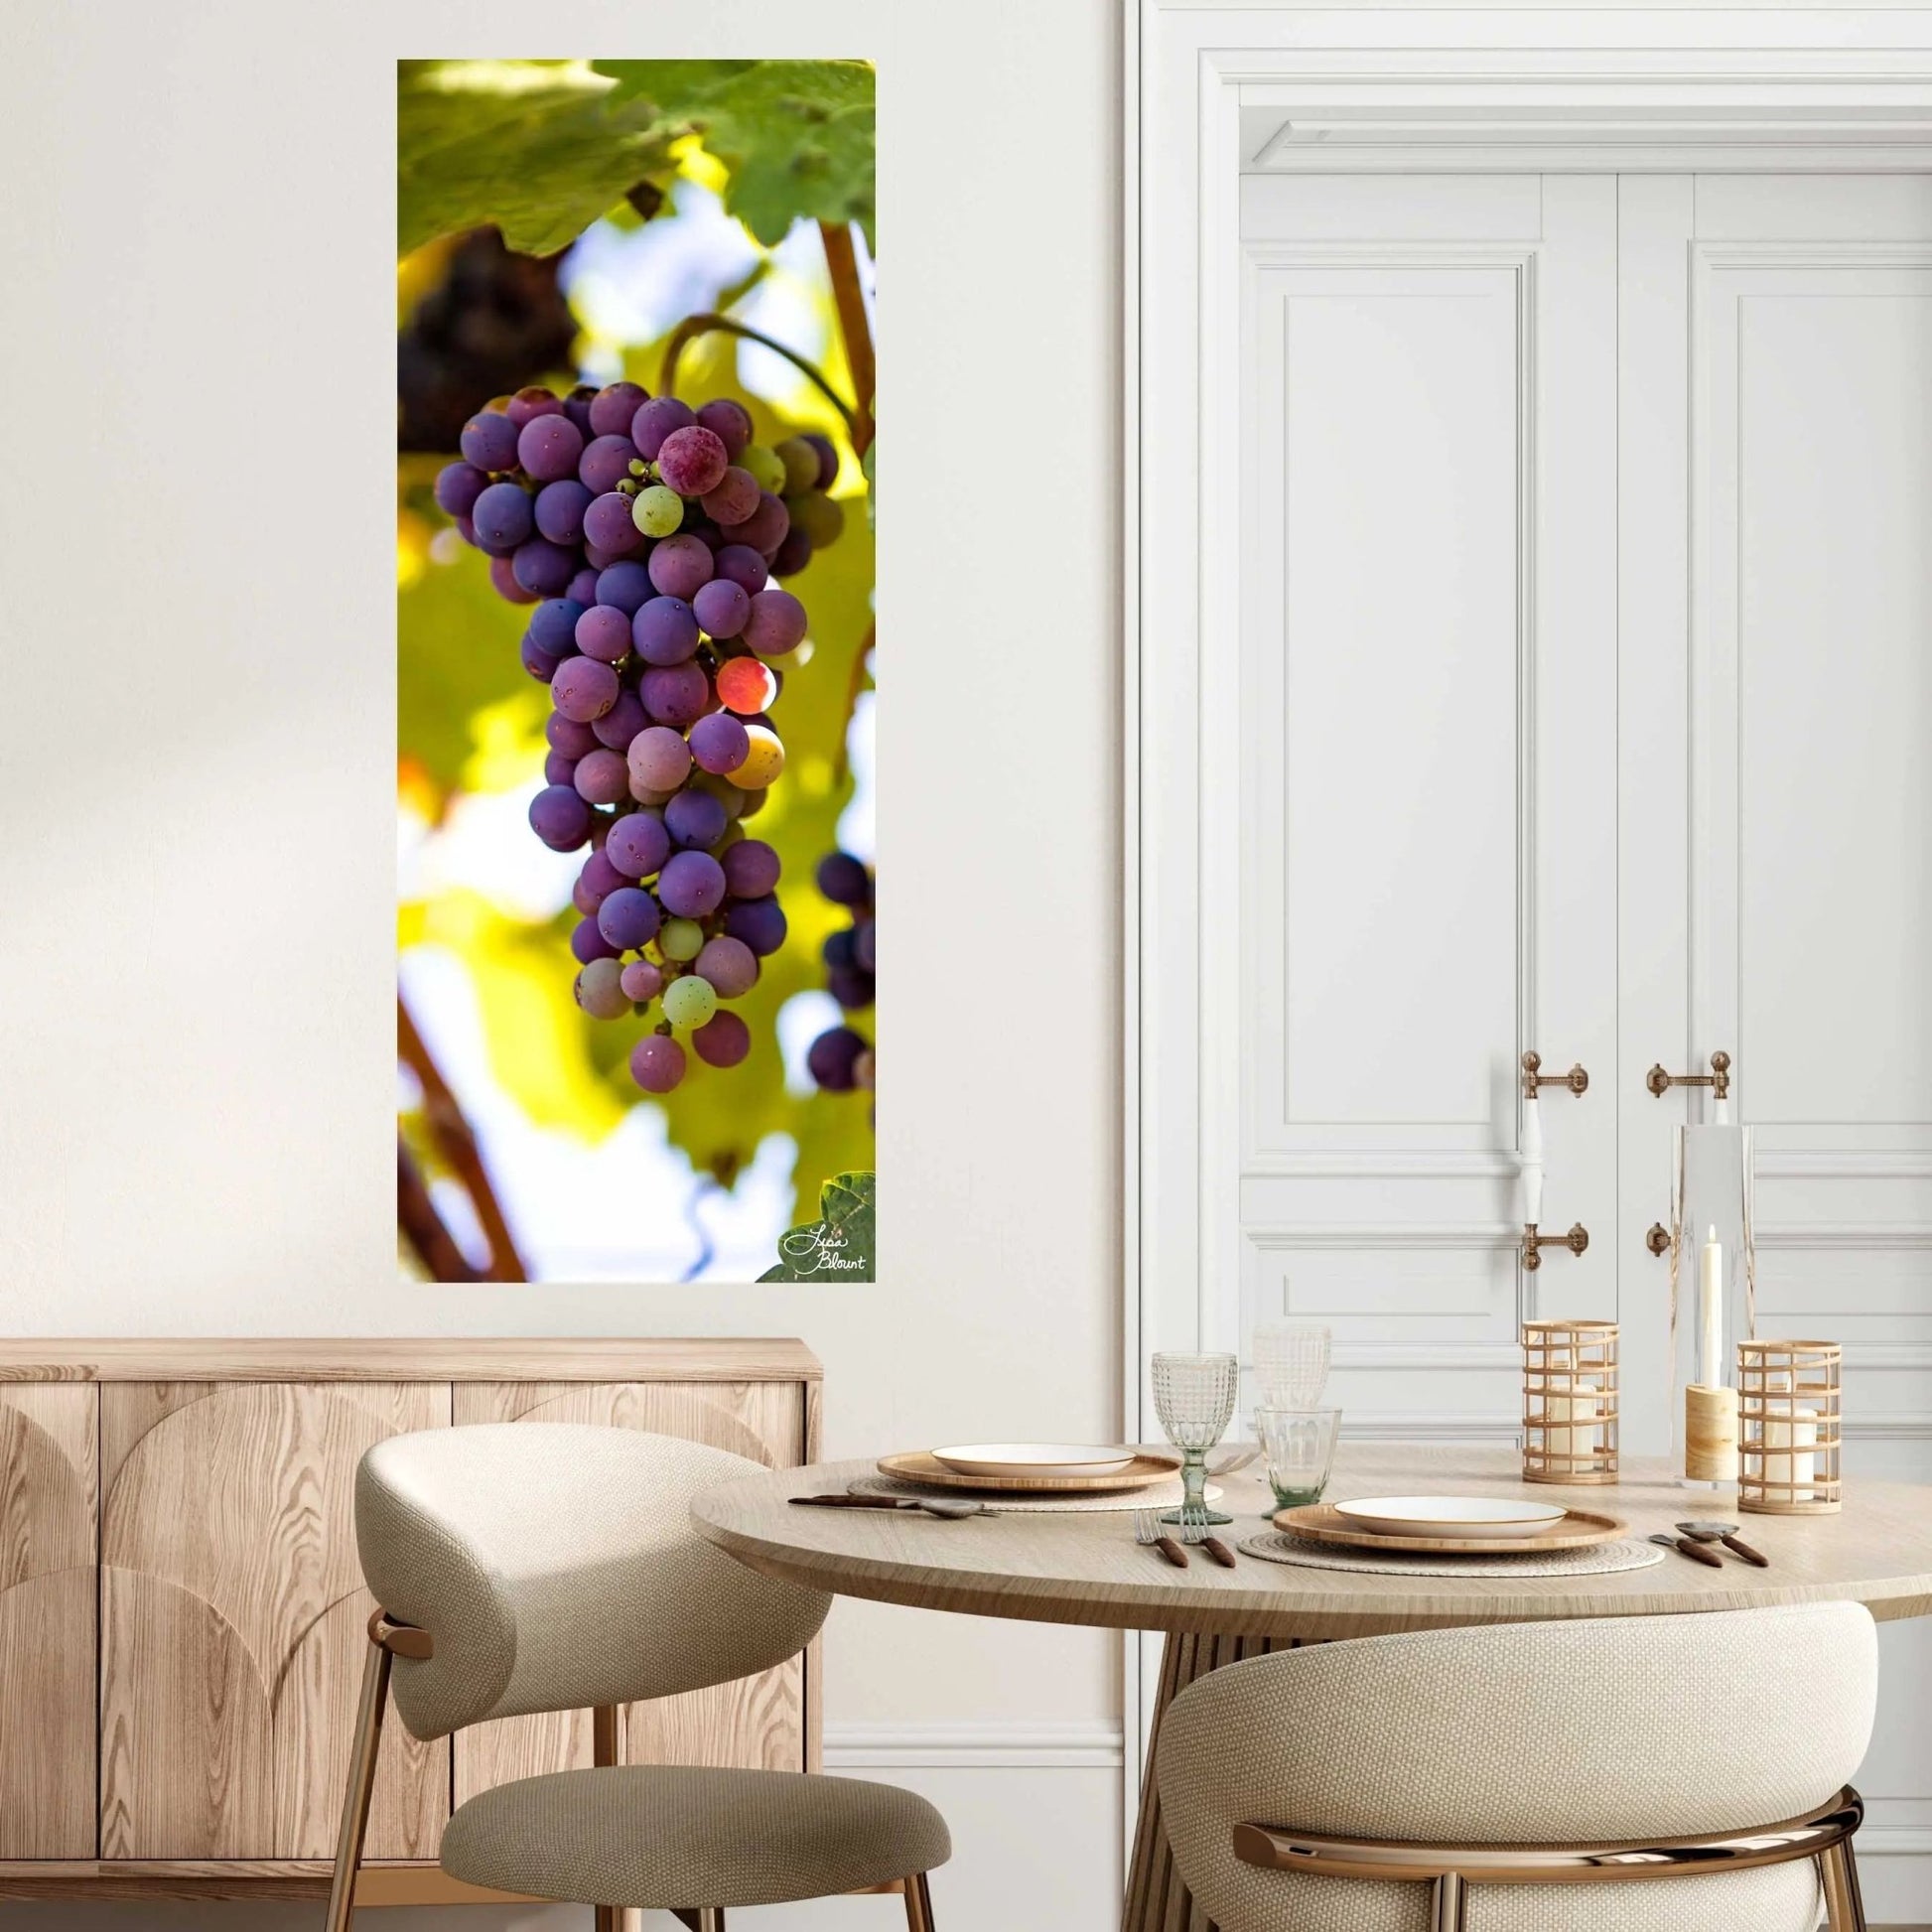 Napa Valley Grapes fine art photography on wall in eating area dining room